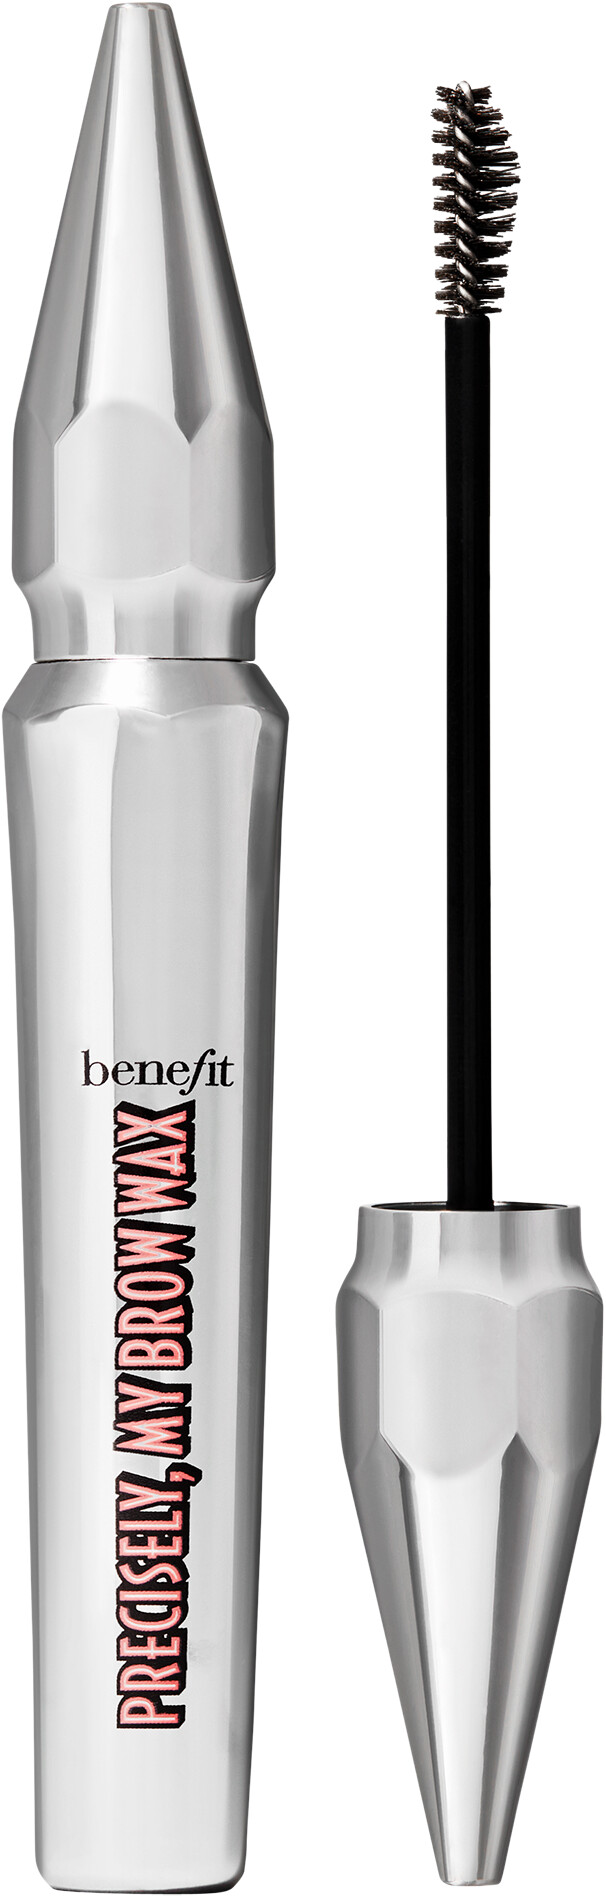 Benefit Precisely, My Brow Wax Full-Pigment Sculpting Brow Wax 5g 2.5 - Neutral Blonde